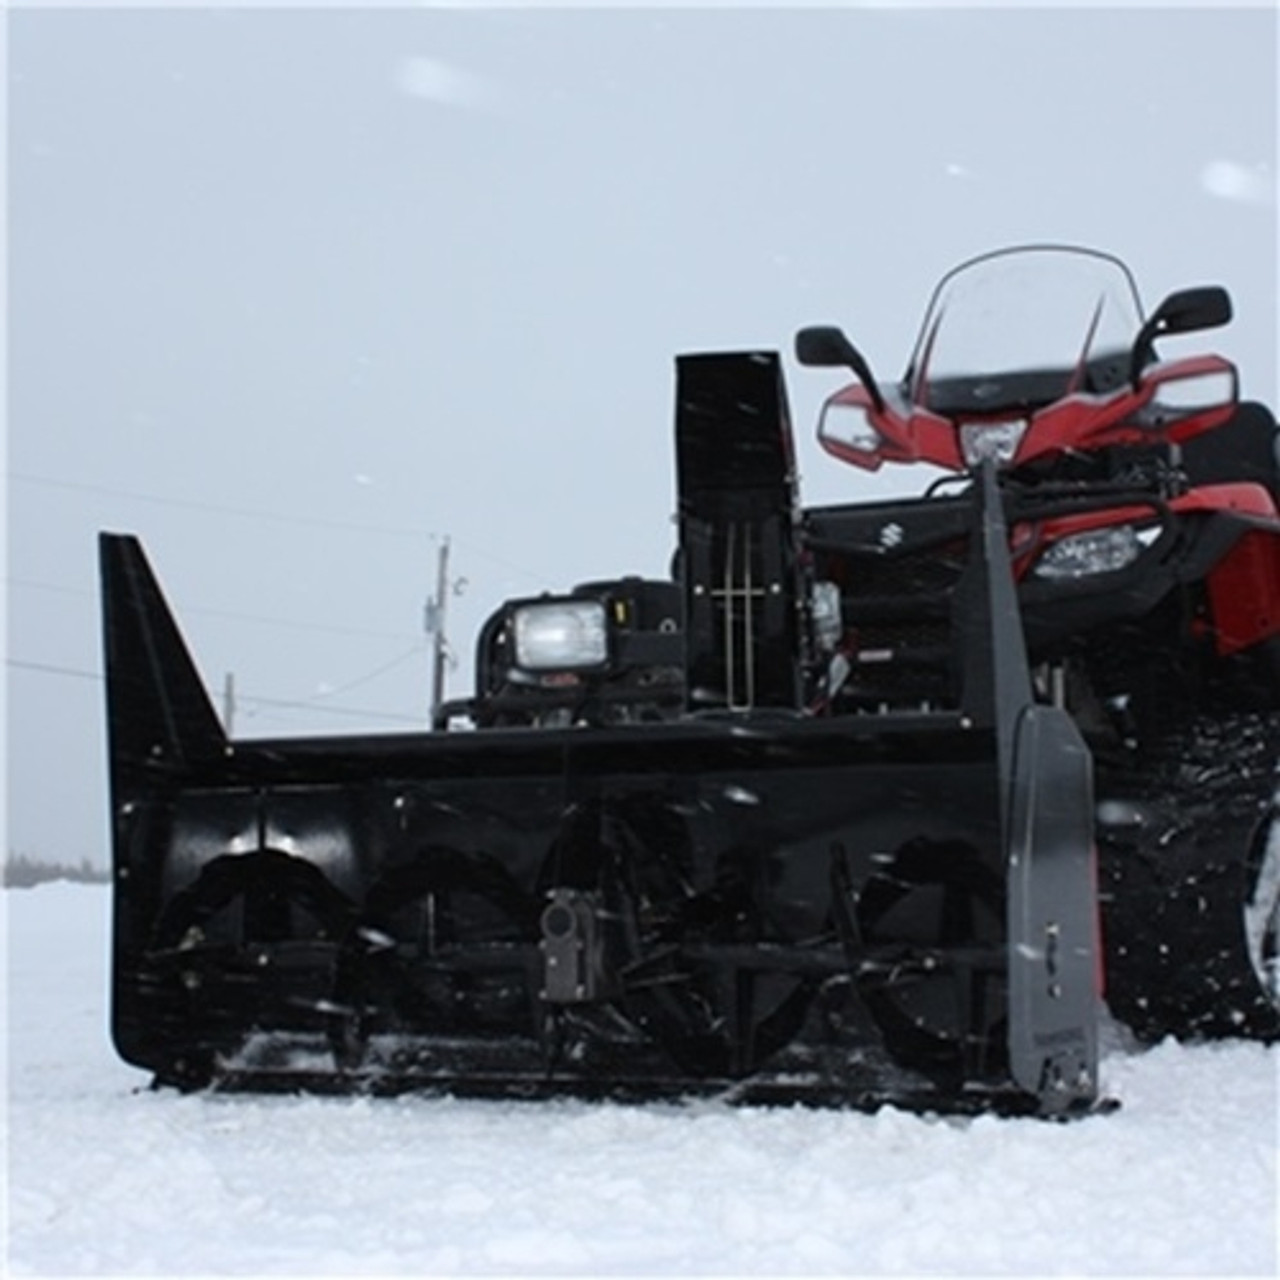 A front-facing image of a Bercomac Kawasaki Mule and Teryx snowblower, installed on an ATV and parked on snowy terrain.